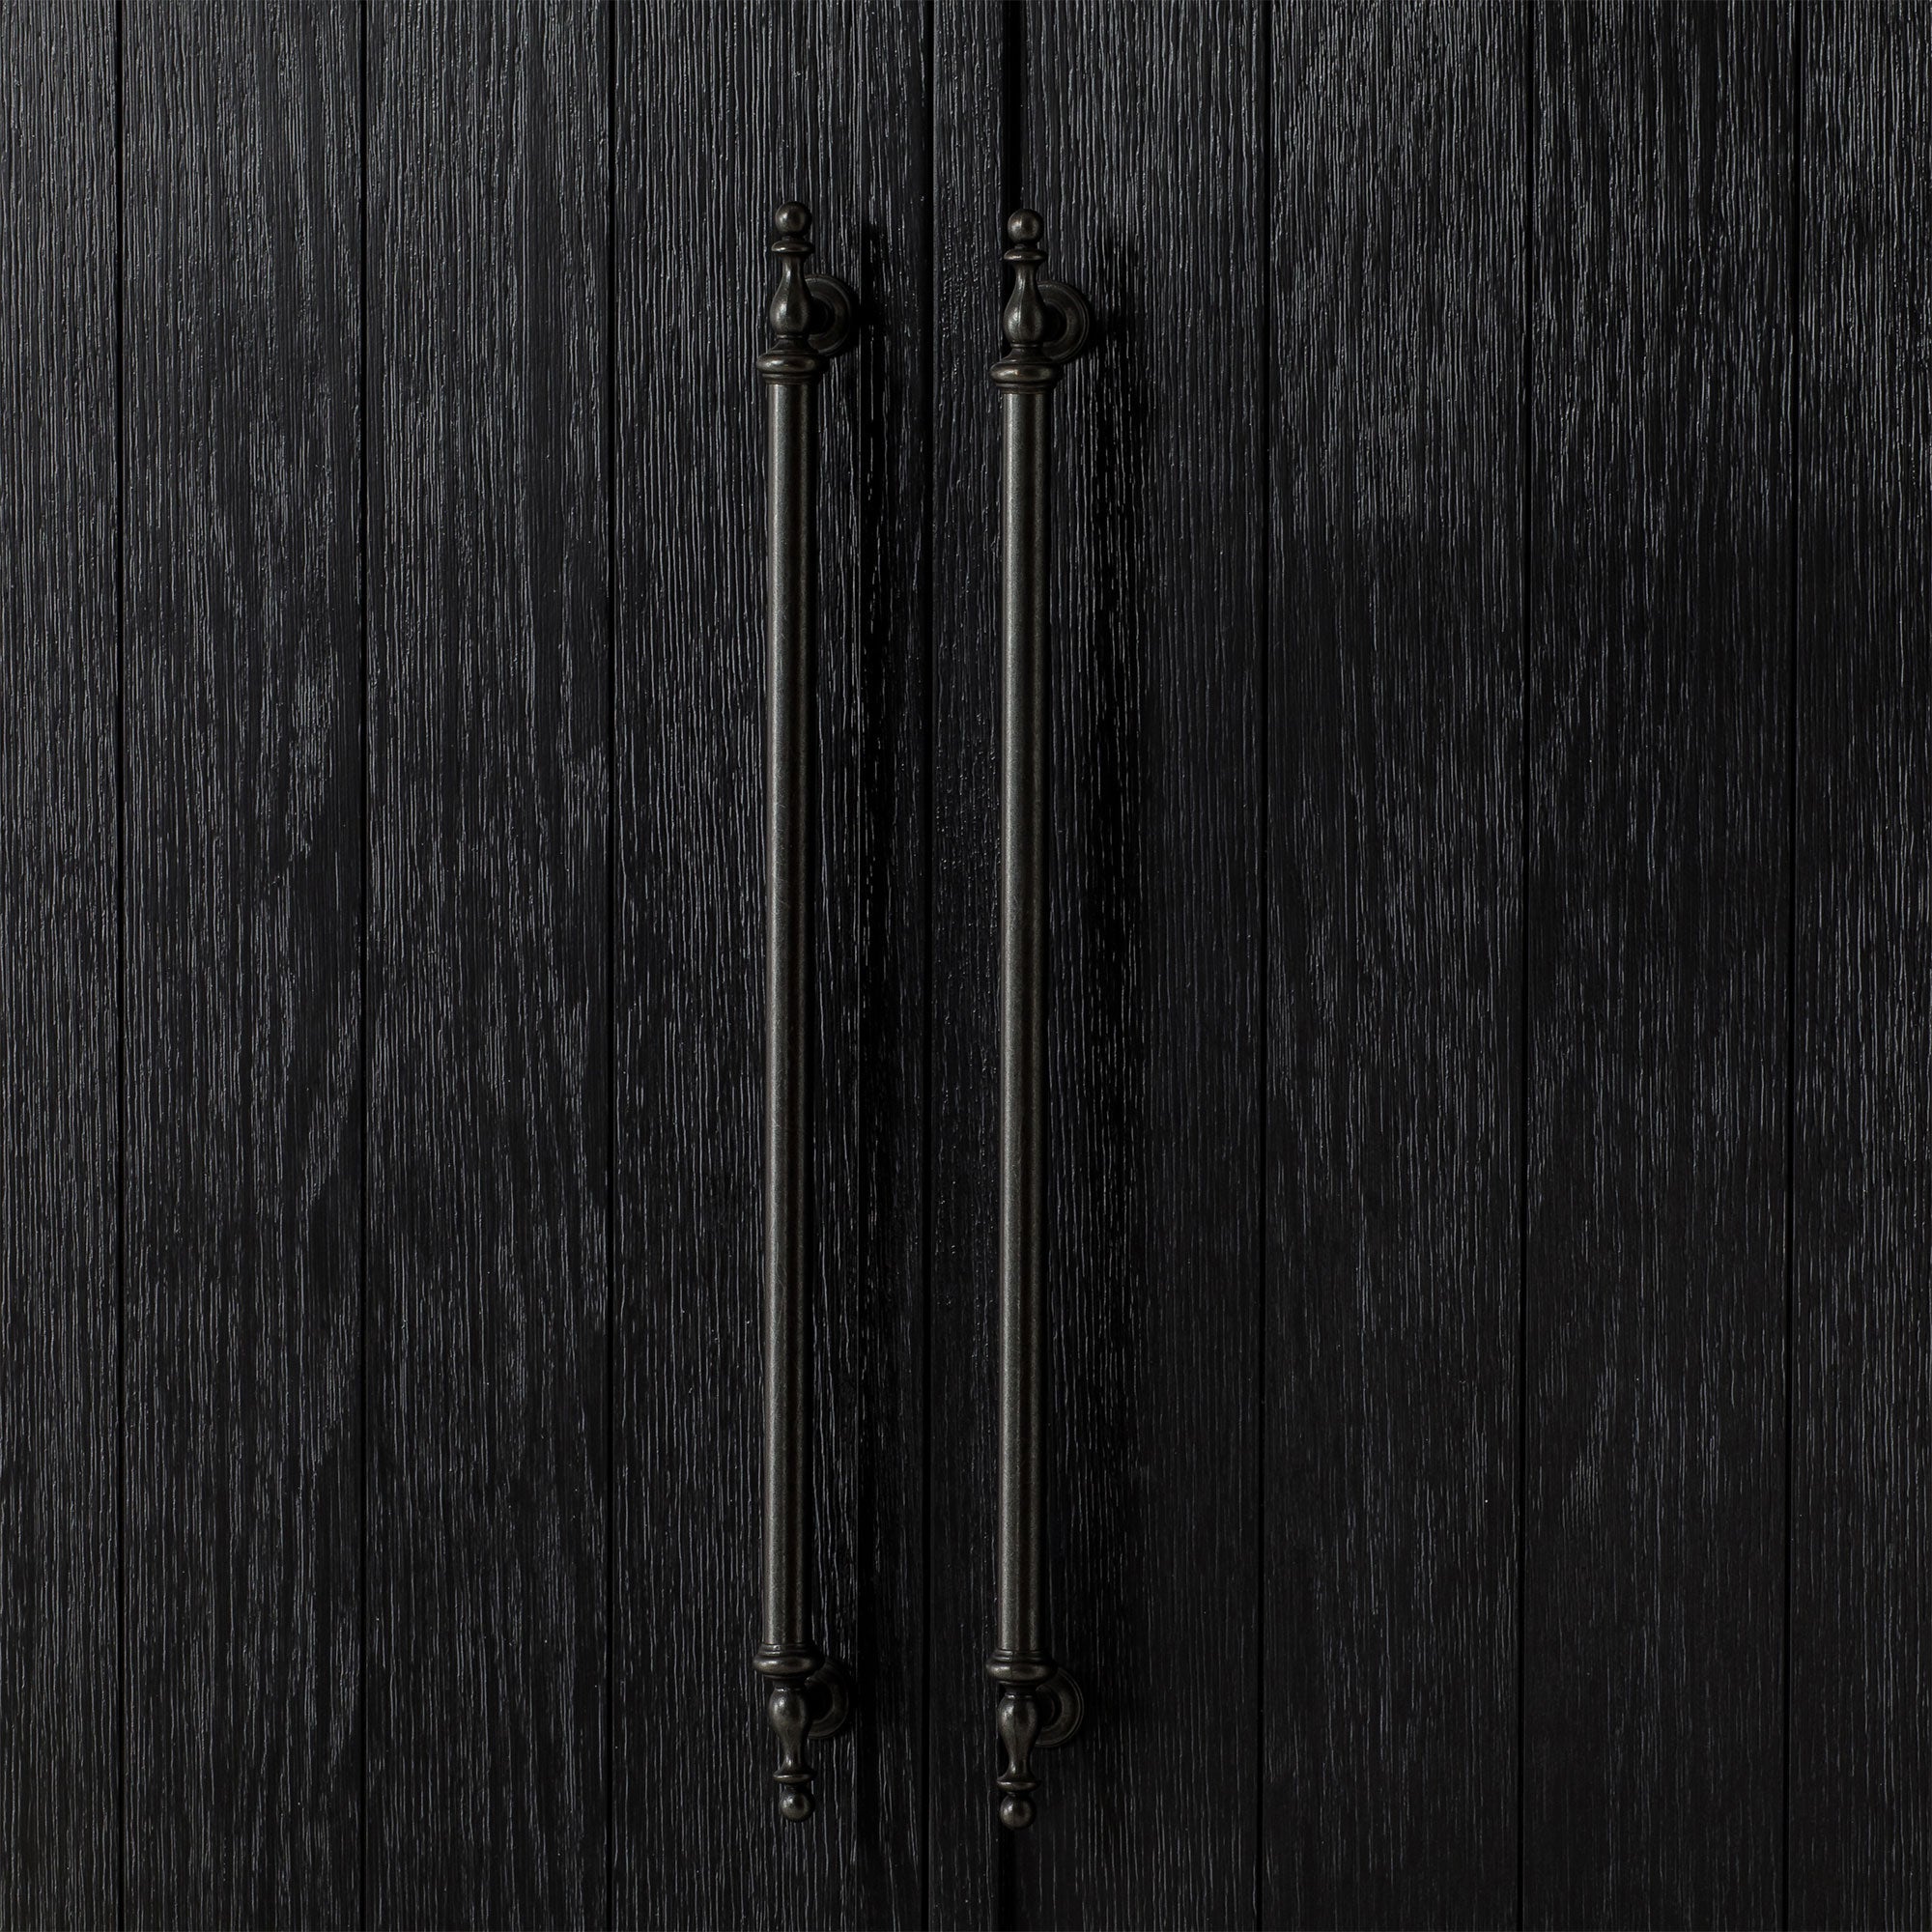 Selene Classical Wooden Cabinet in Antiqued Black Finish in Cabinets by Maven Lane